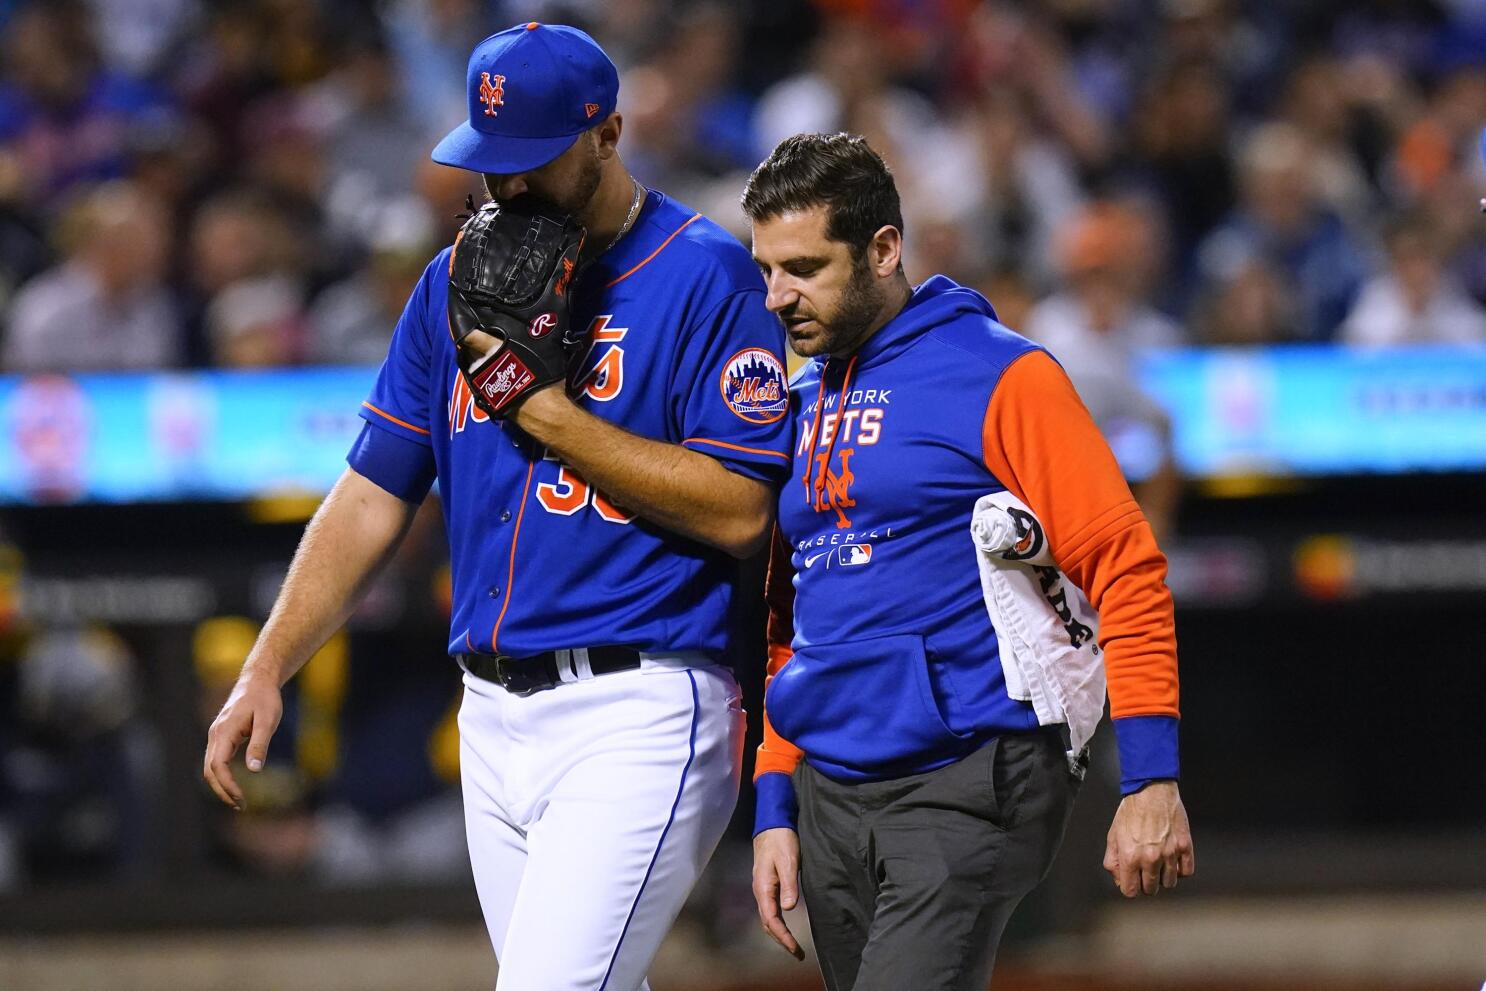 Mets pitcher Megill out a month, Escobar back from hospital